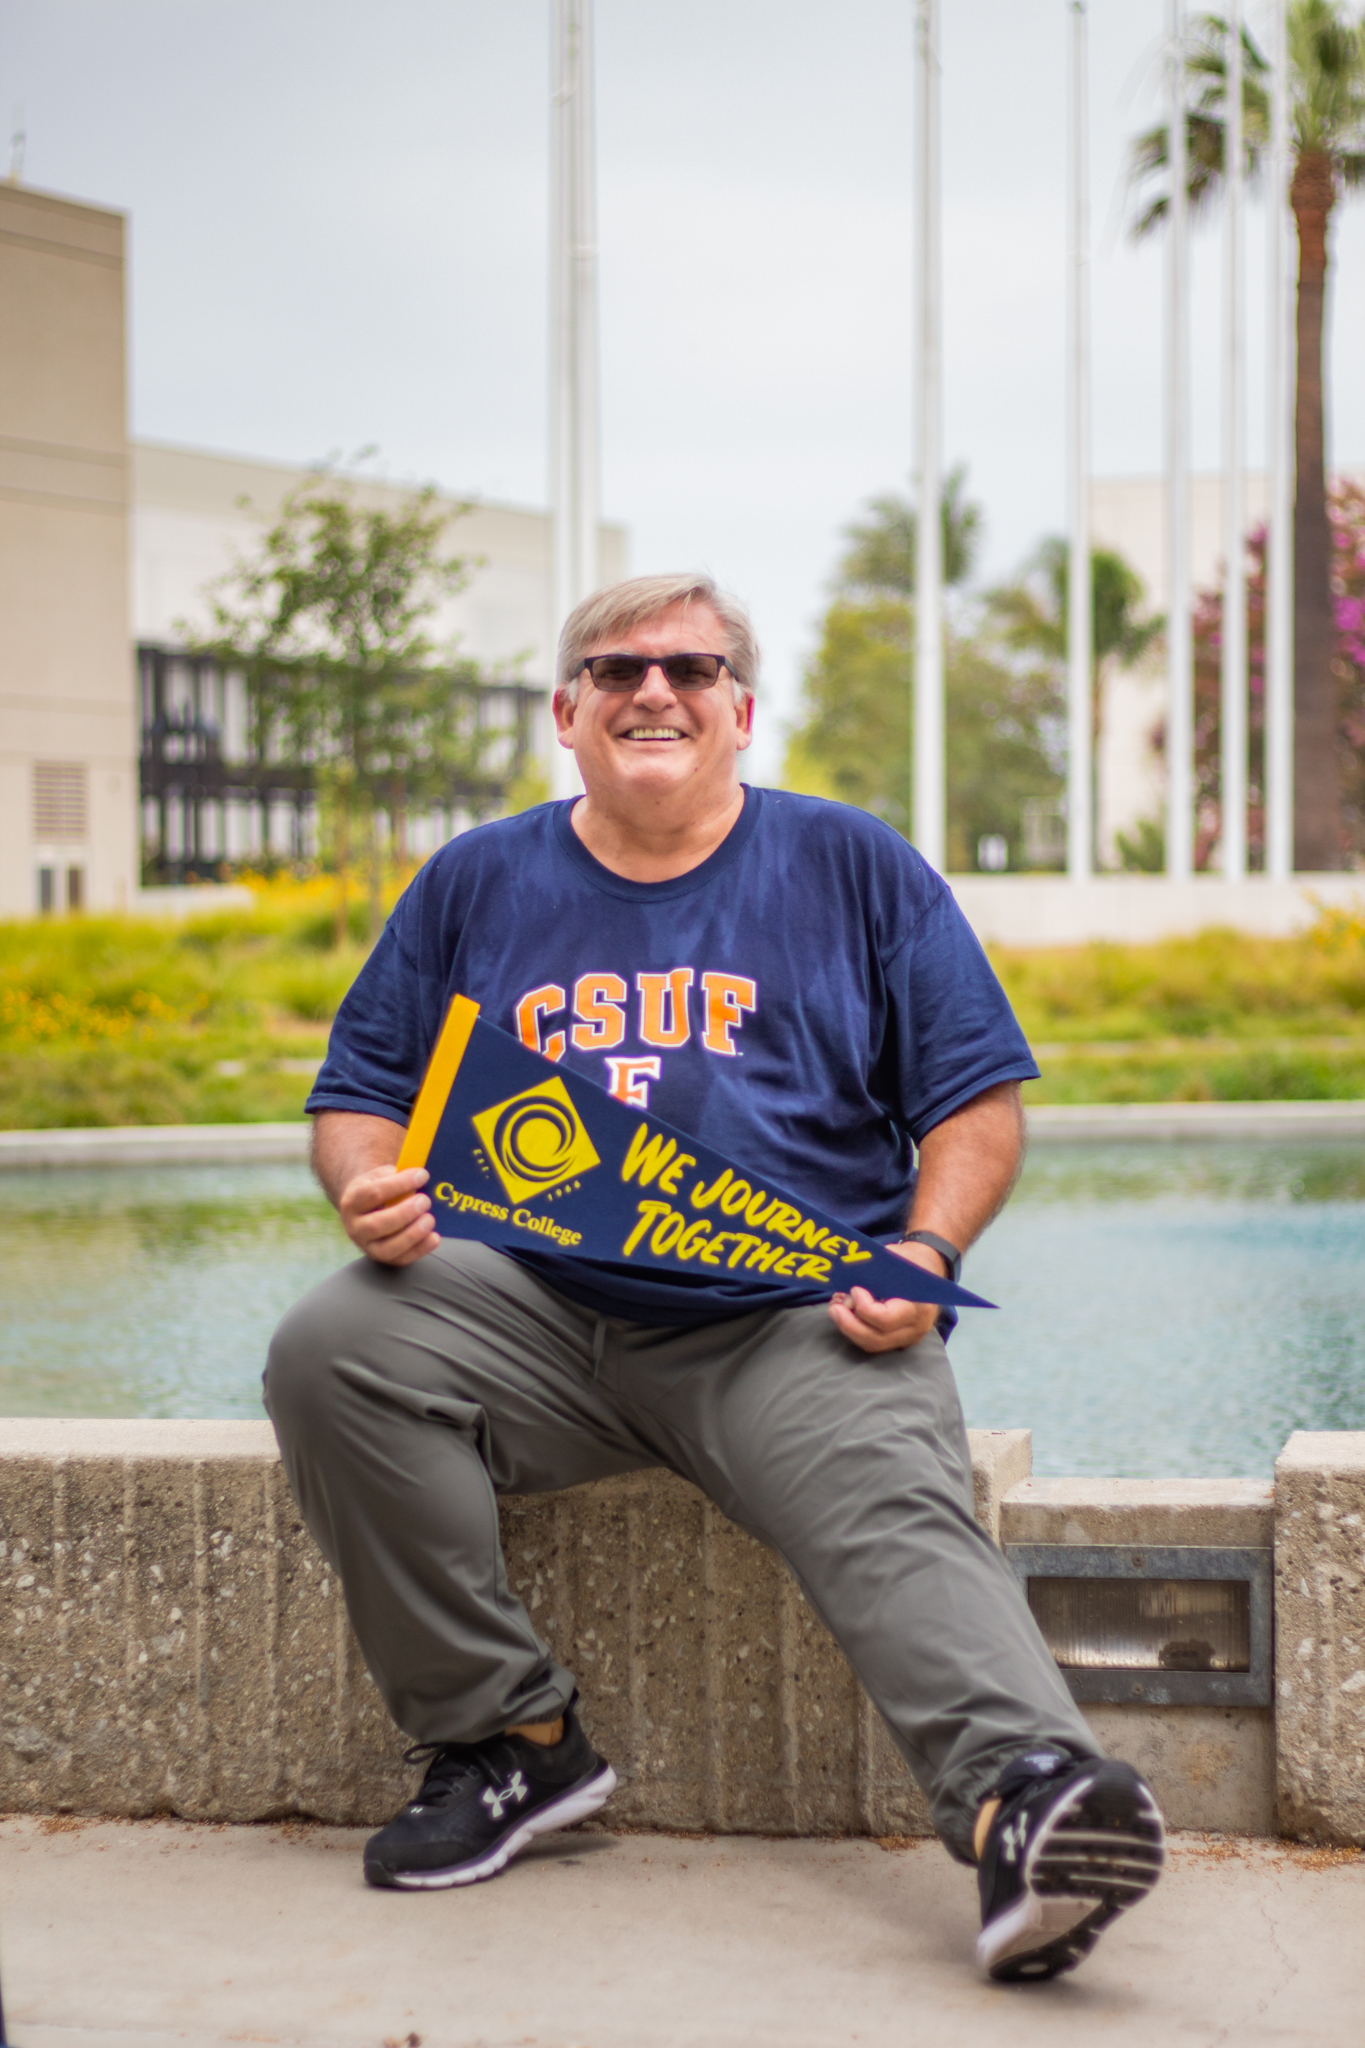 Patrick Hale sits at the edge of the Cypress College pond, holding a college pennant as he smiles at the camera.